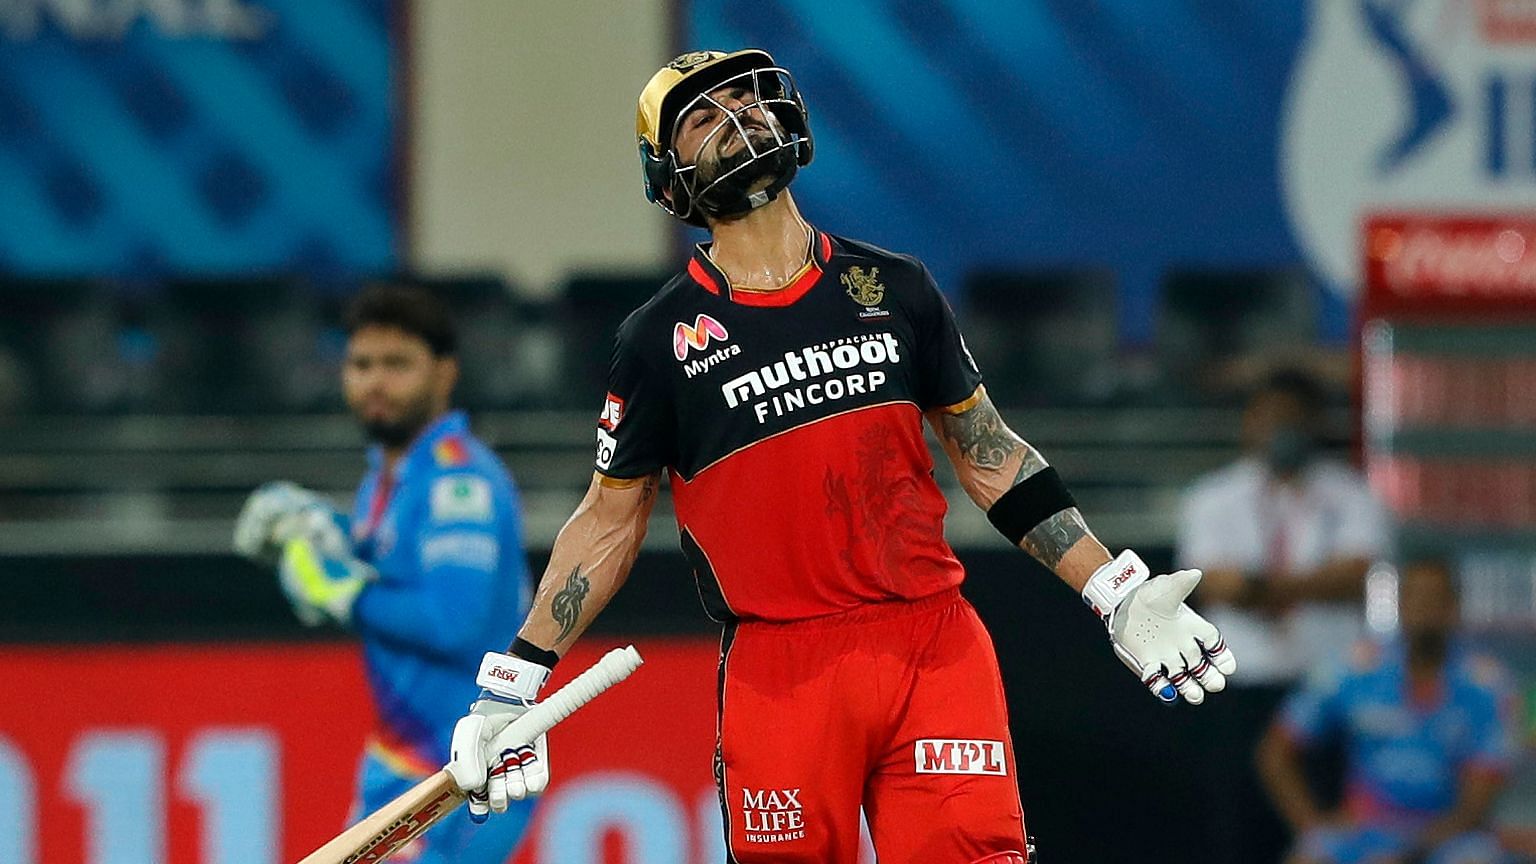 Royal Challengers Bangalore suffered their second loss of the season against Delhi Capitals.